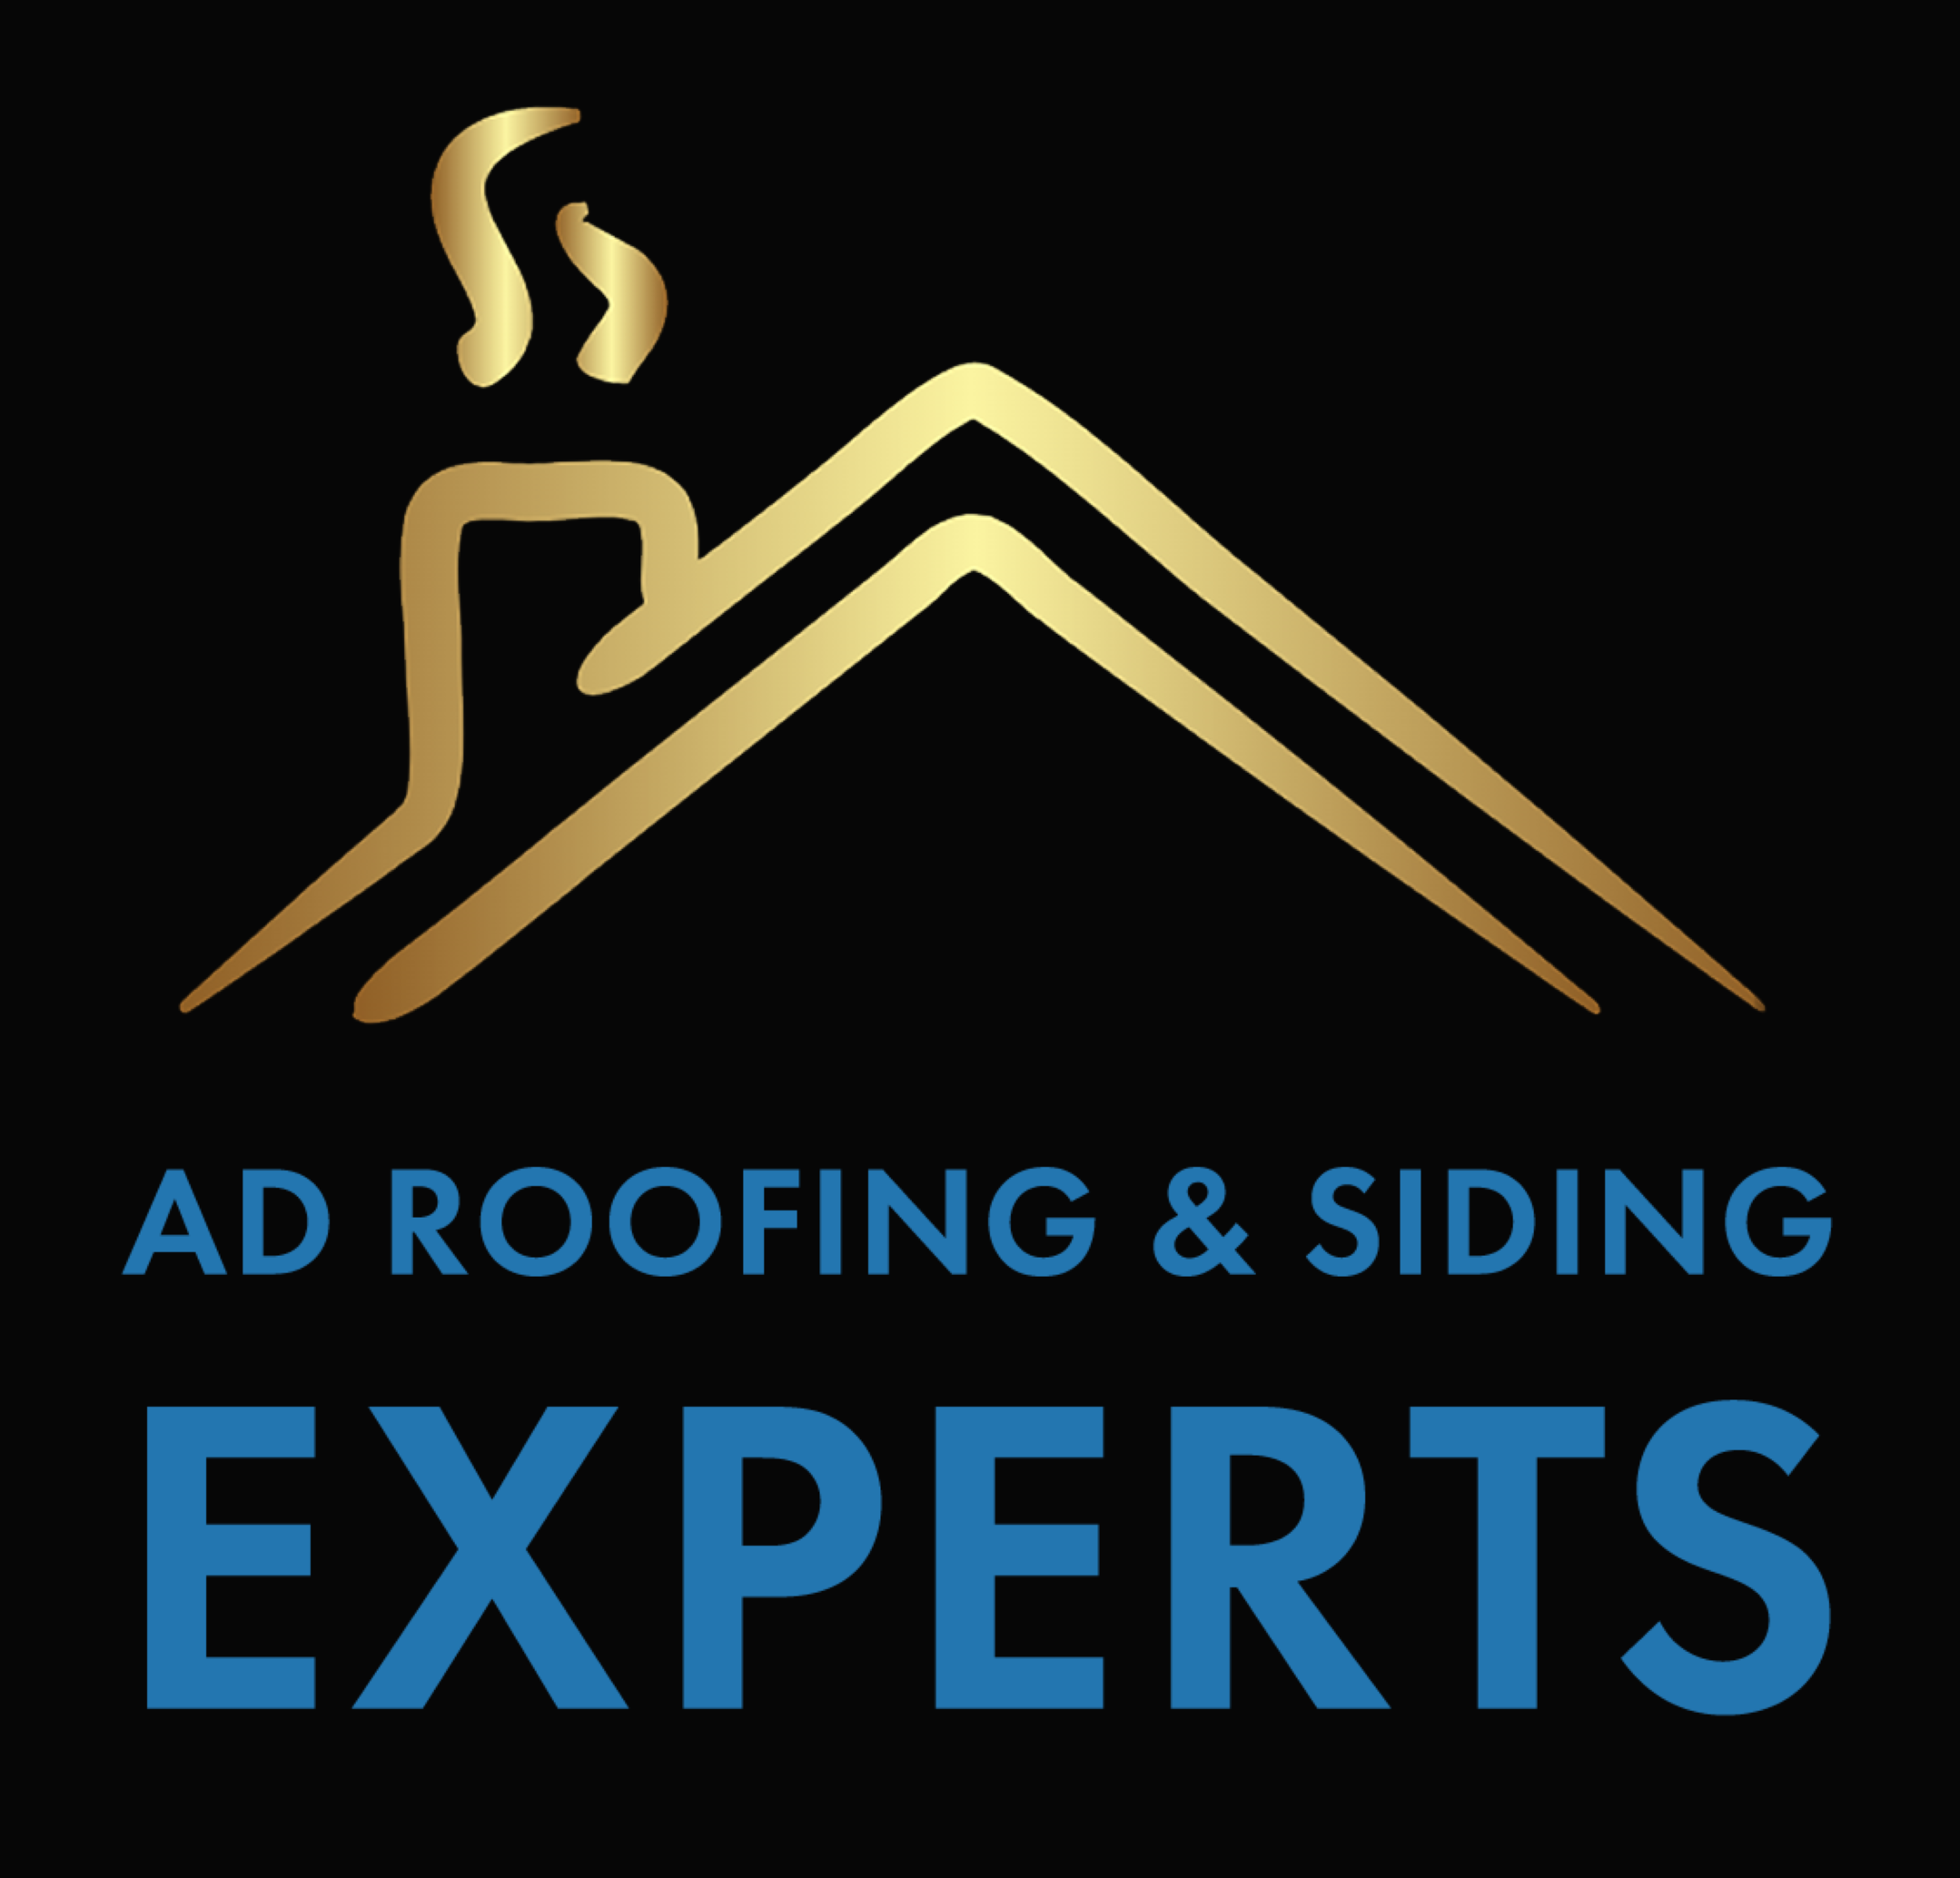 AD Roofing and Siding Experts